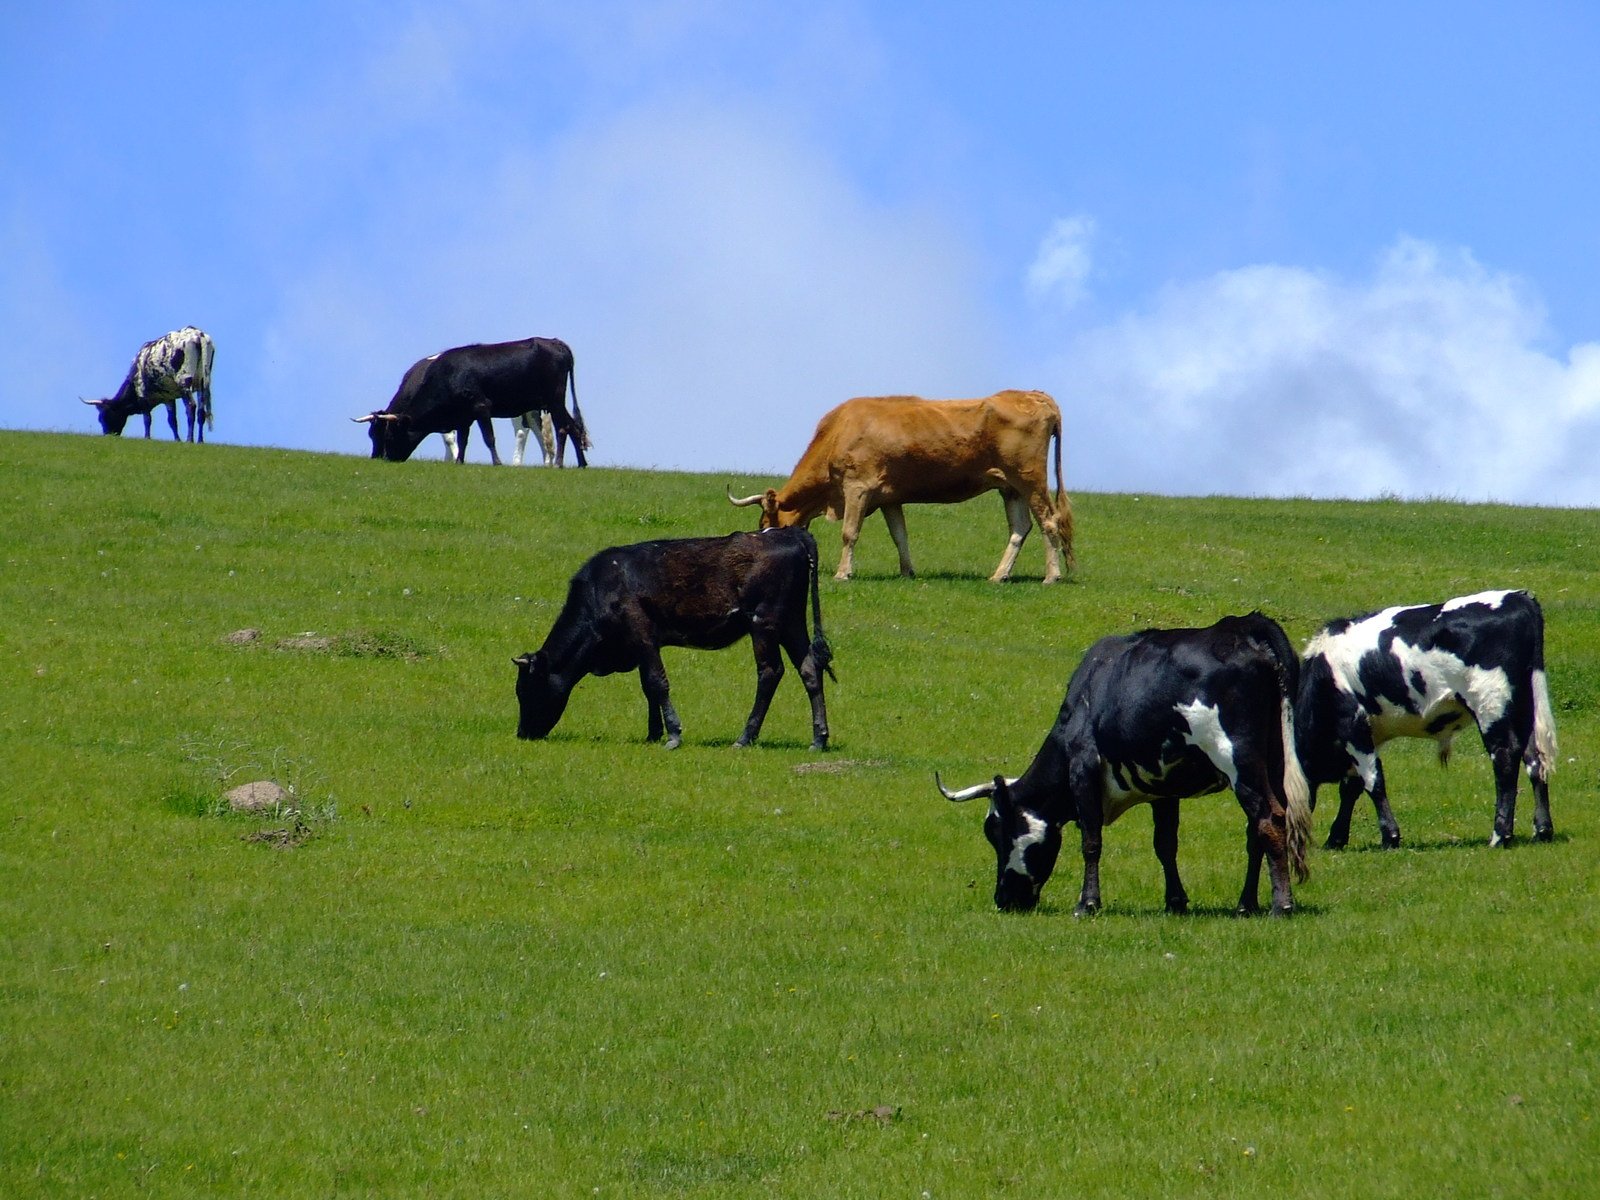 many cows are grazing in a large grassy field